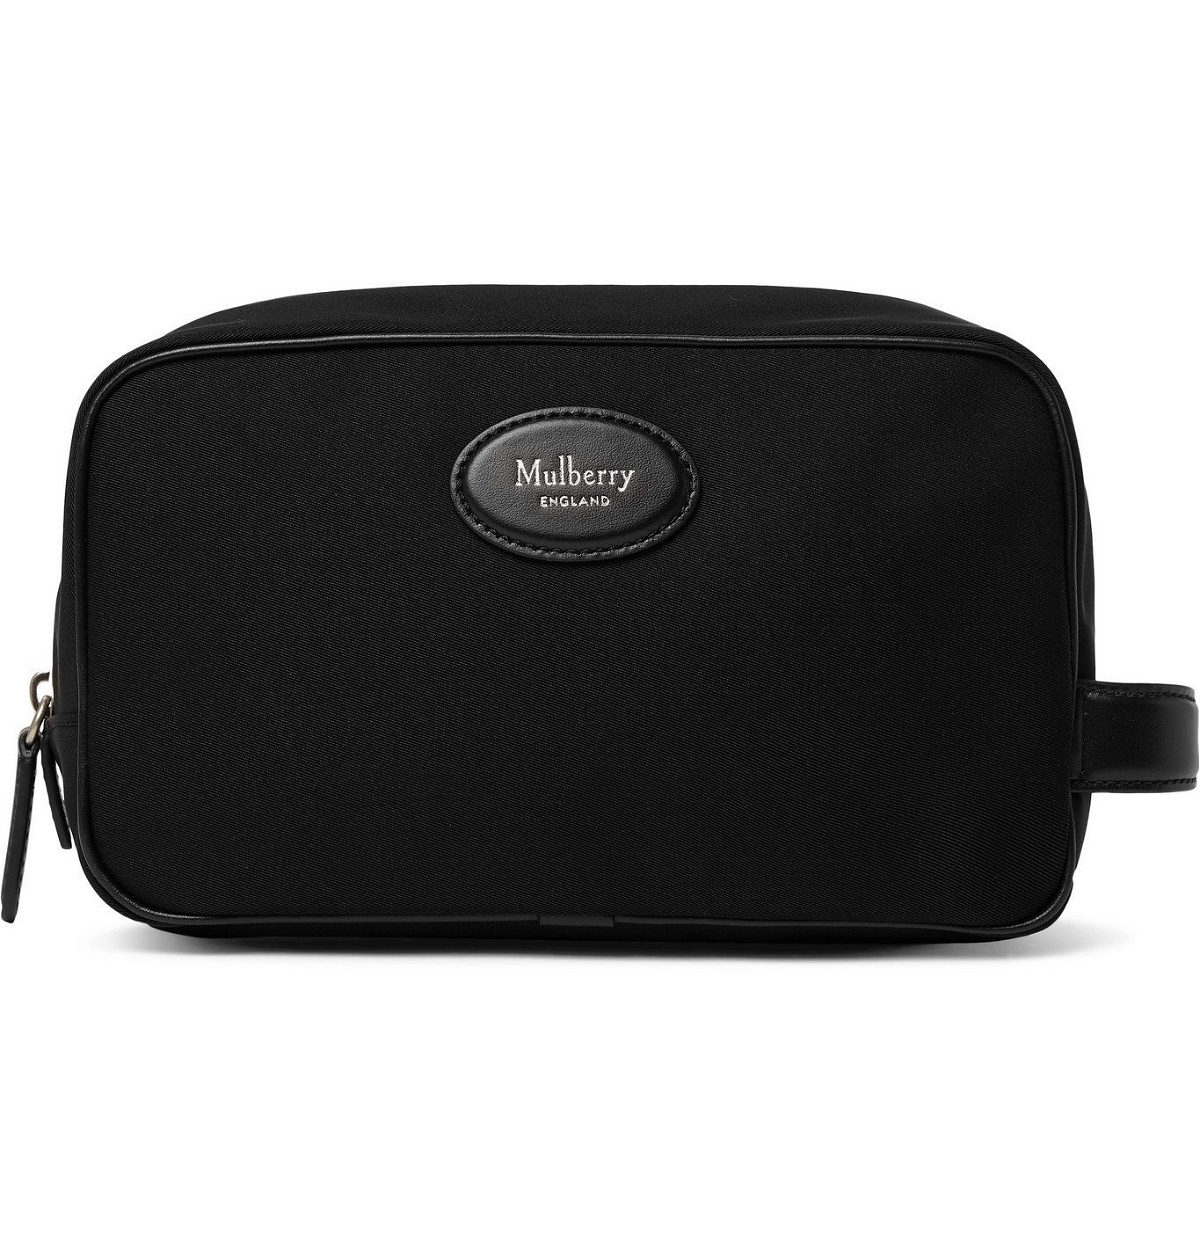 Mulberry Black Leather Messenger Bag Mulberry | TLC